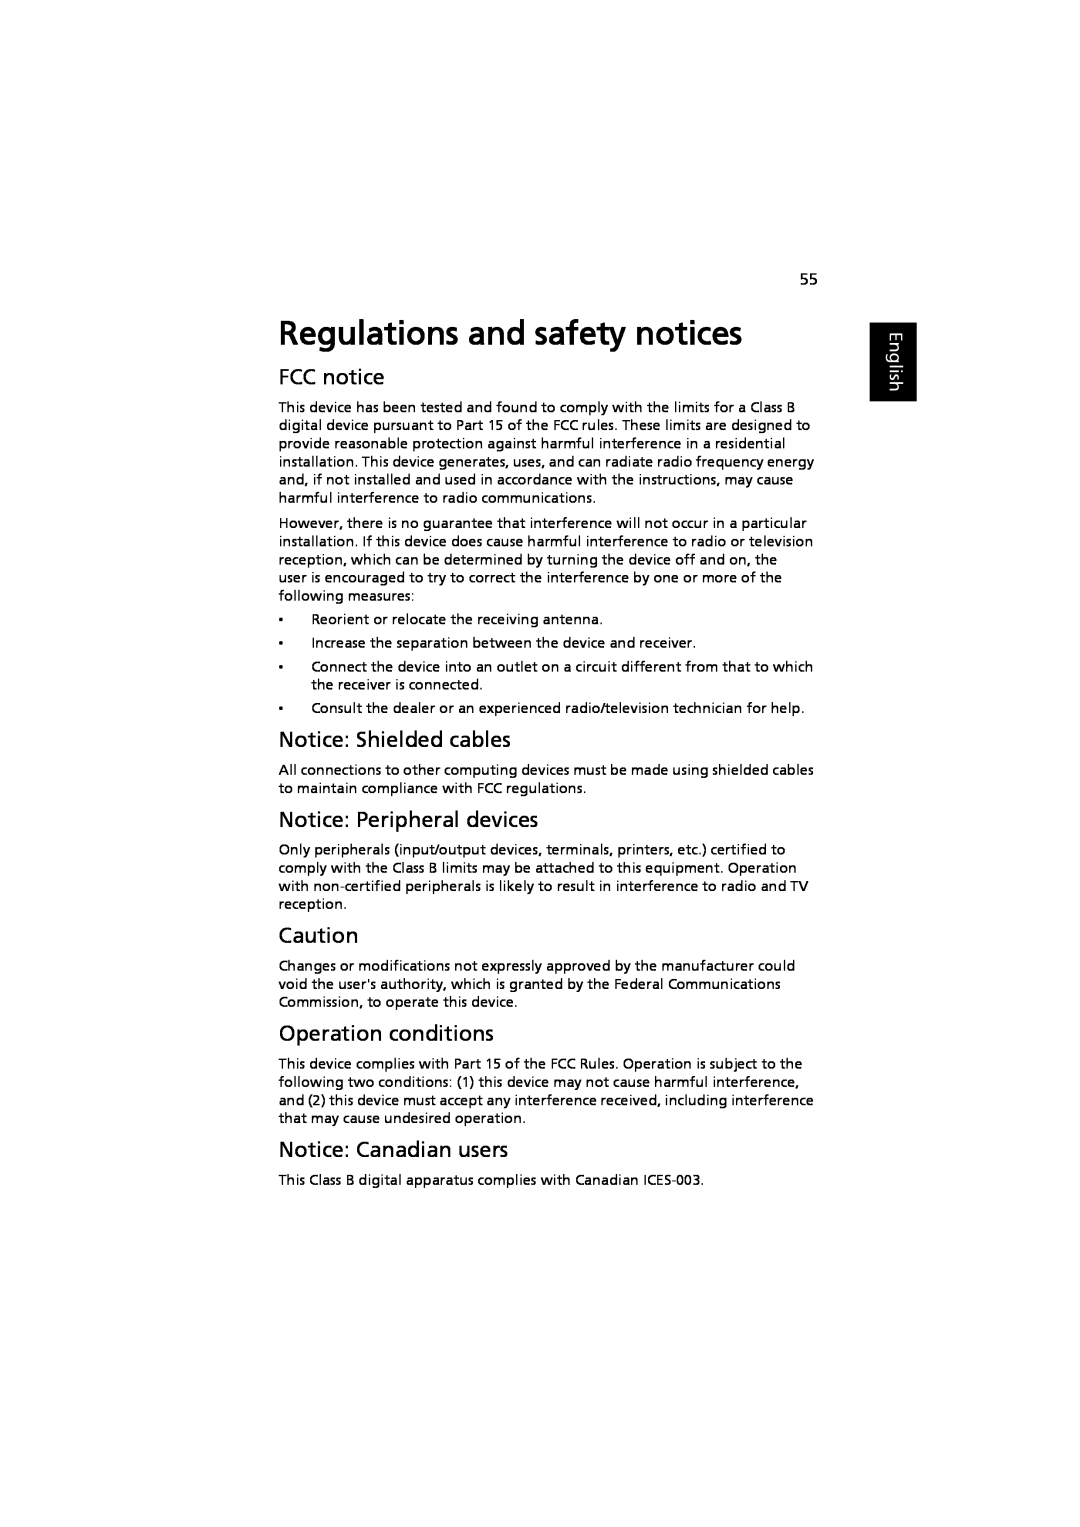 Acer MRJFZ1100A Regulations and safety notices, FCC notice, Notice Shielded cables, Notice Peripheral devices, English 